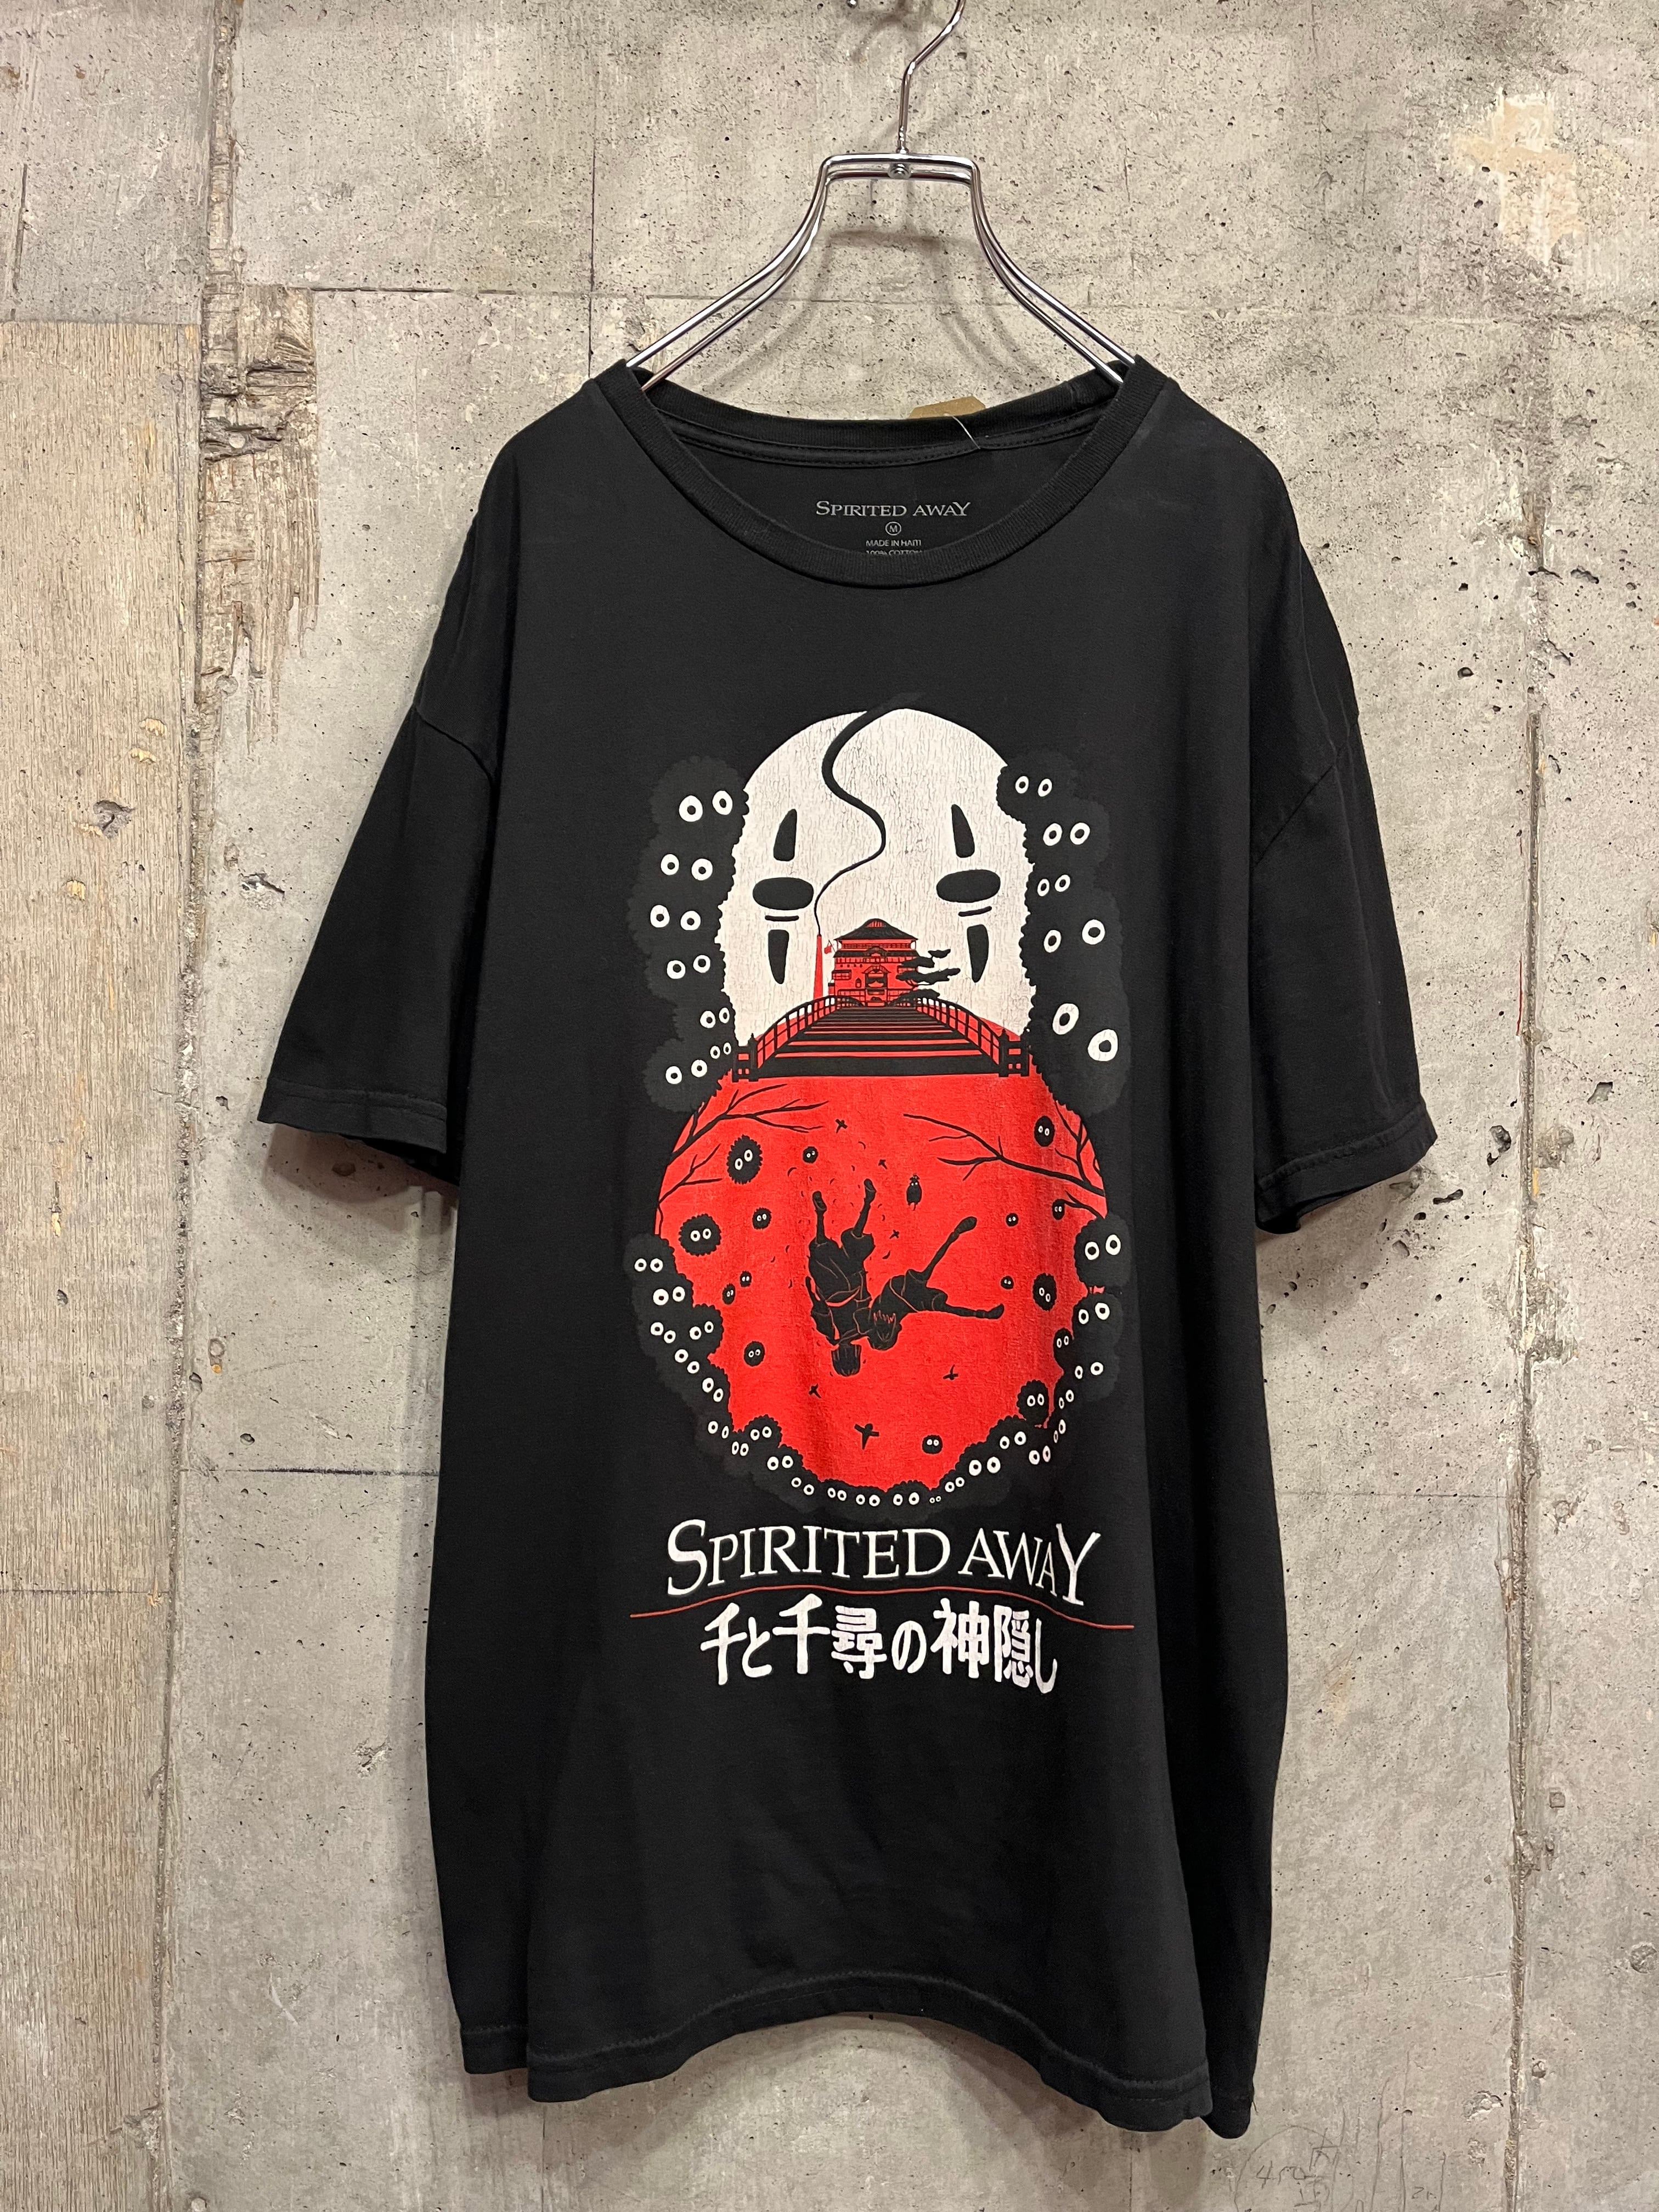 【M】千と千尋の神隠しTシャツ 古着 ジブリ 映画T | Small Cat スモールキャット powered by BASE